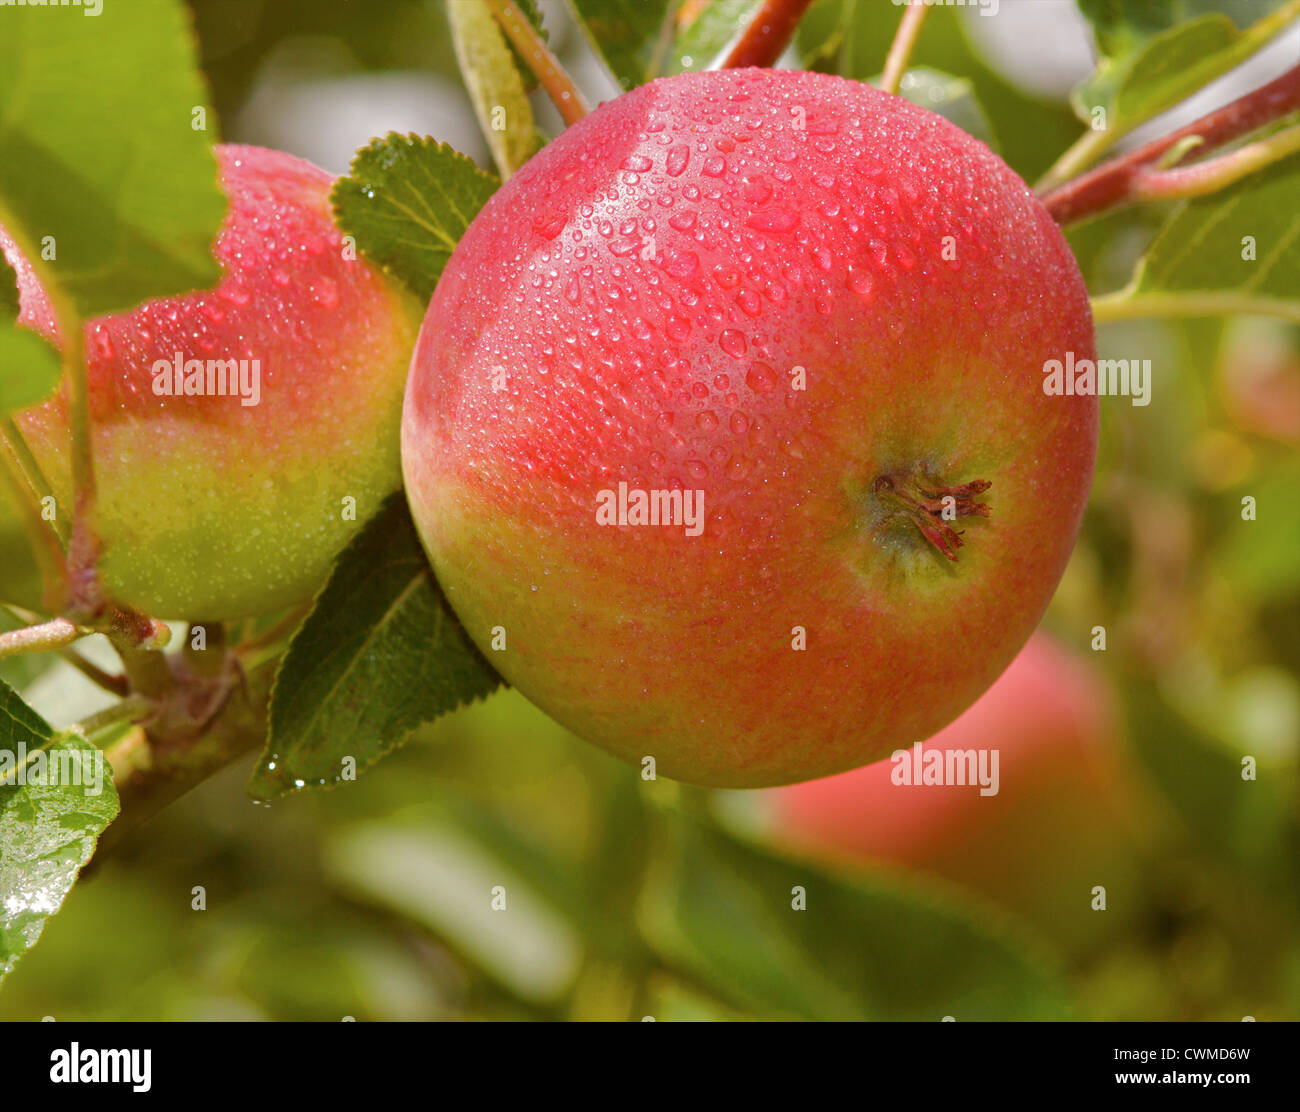 Perfect apple on tree Discovery Apple Stock Photo